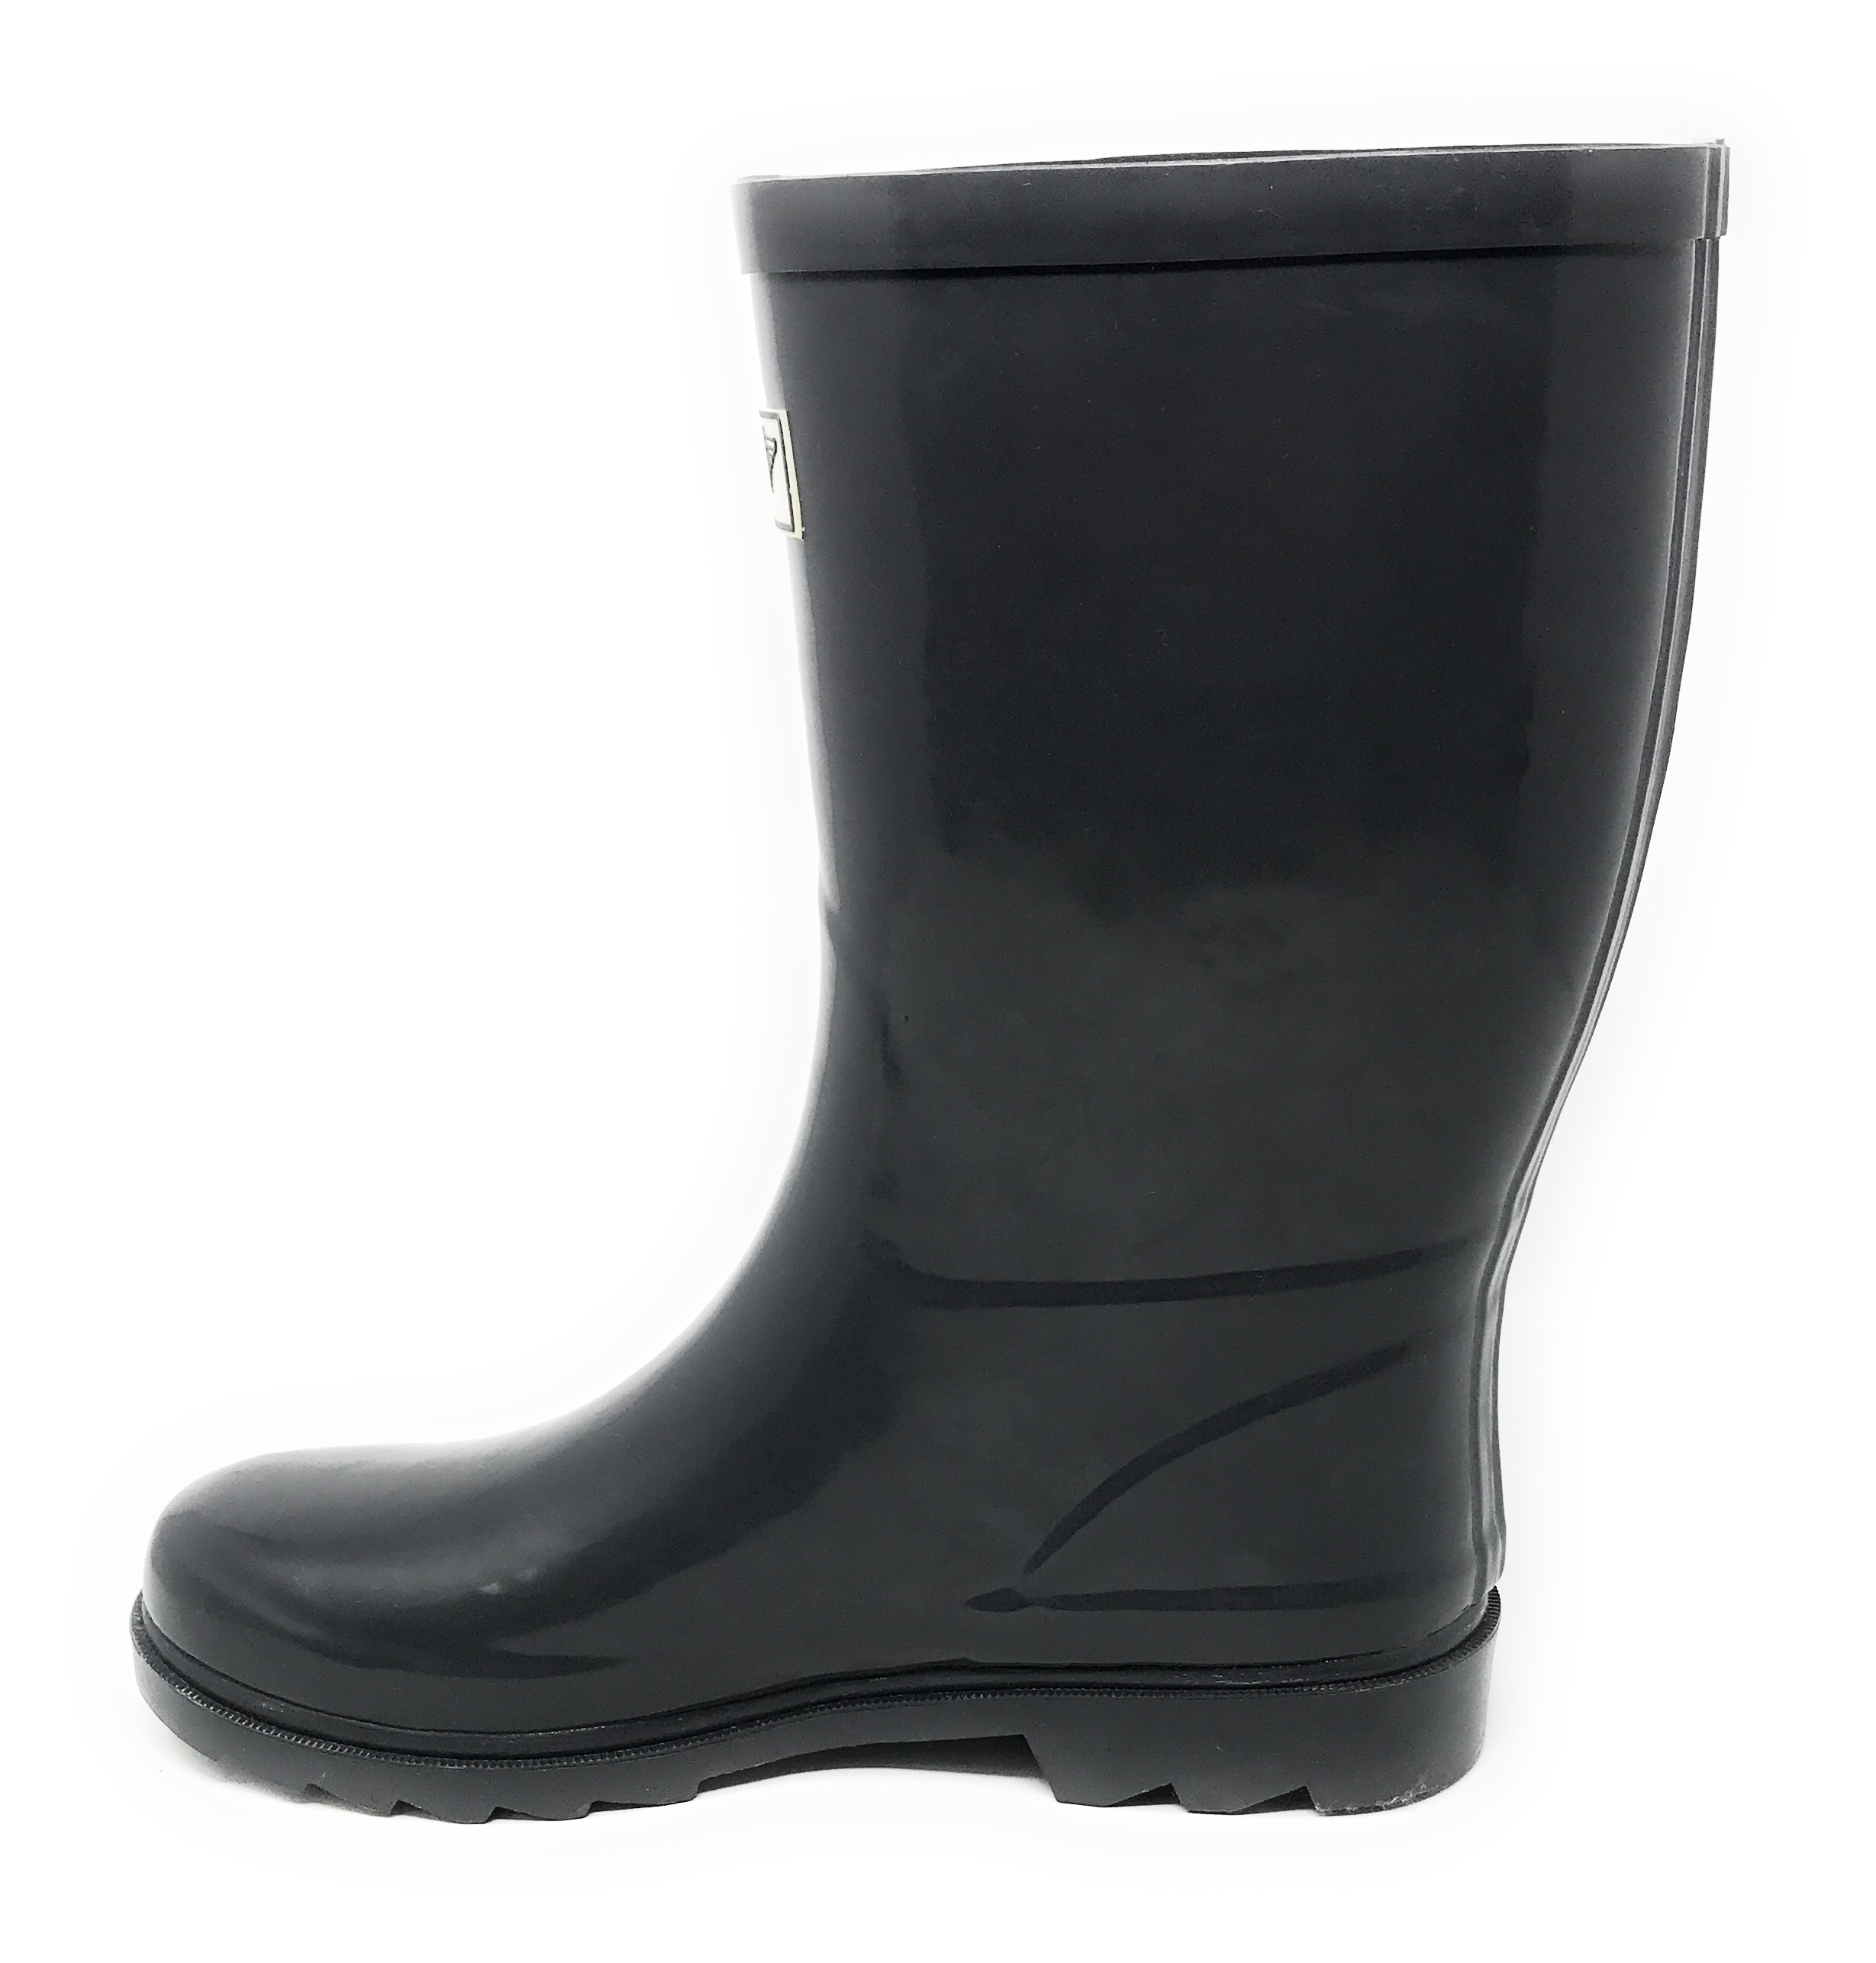 Forever Young Women's Short Shaft Rain Boots - image 4 of 5